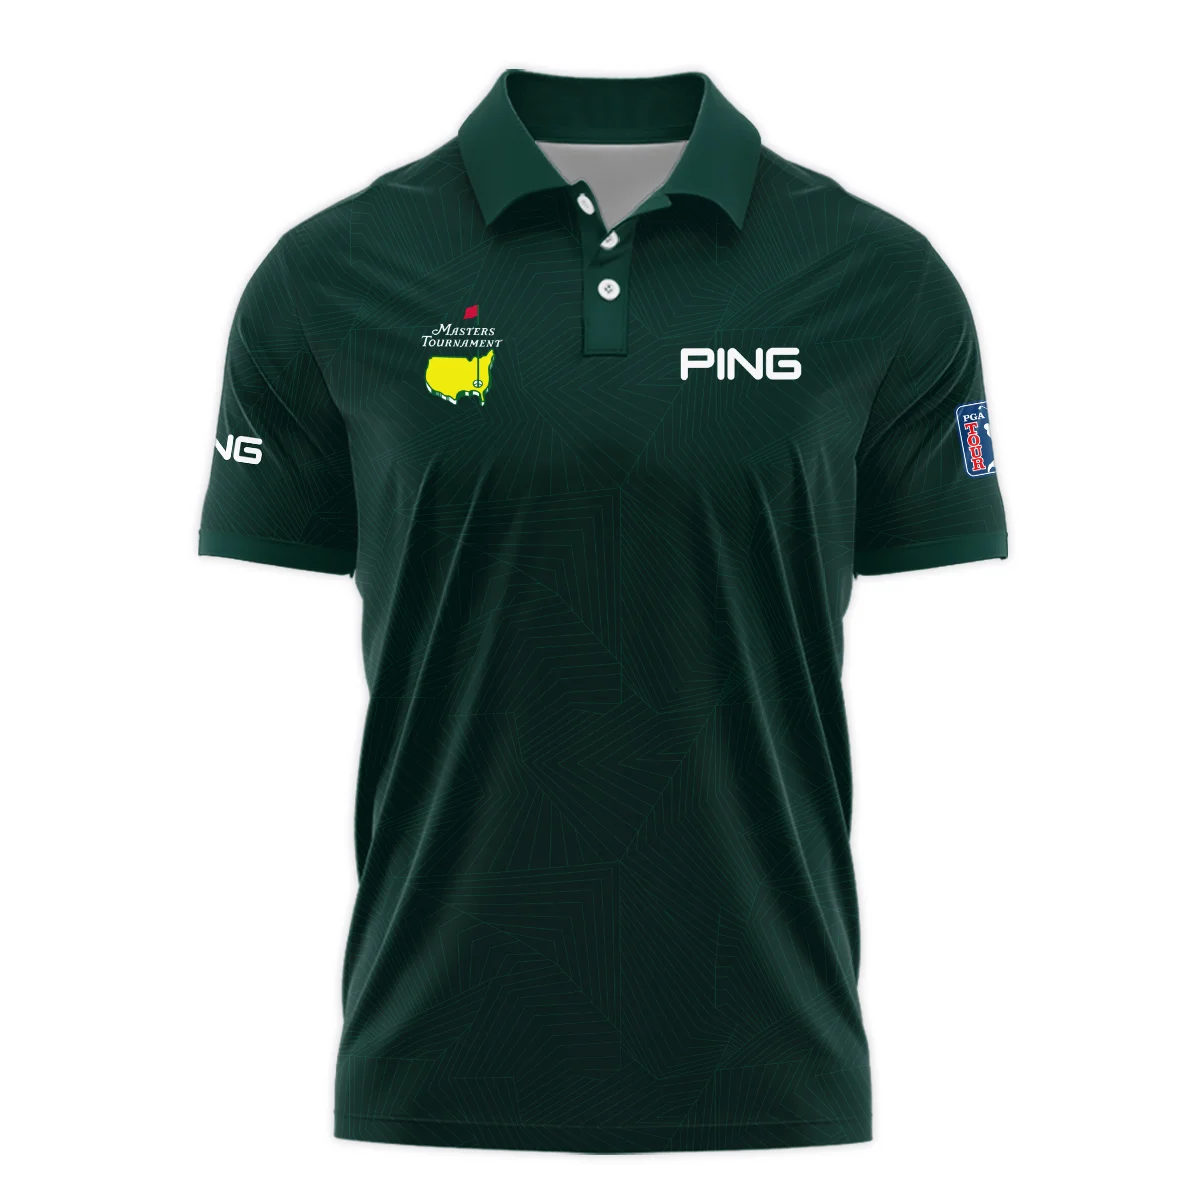 Masters Tournament Ping Pattern Sport Jersey Dark Green Vneck Long Polo Shirt Style Classic Long Polo Shirt For Men